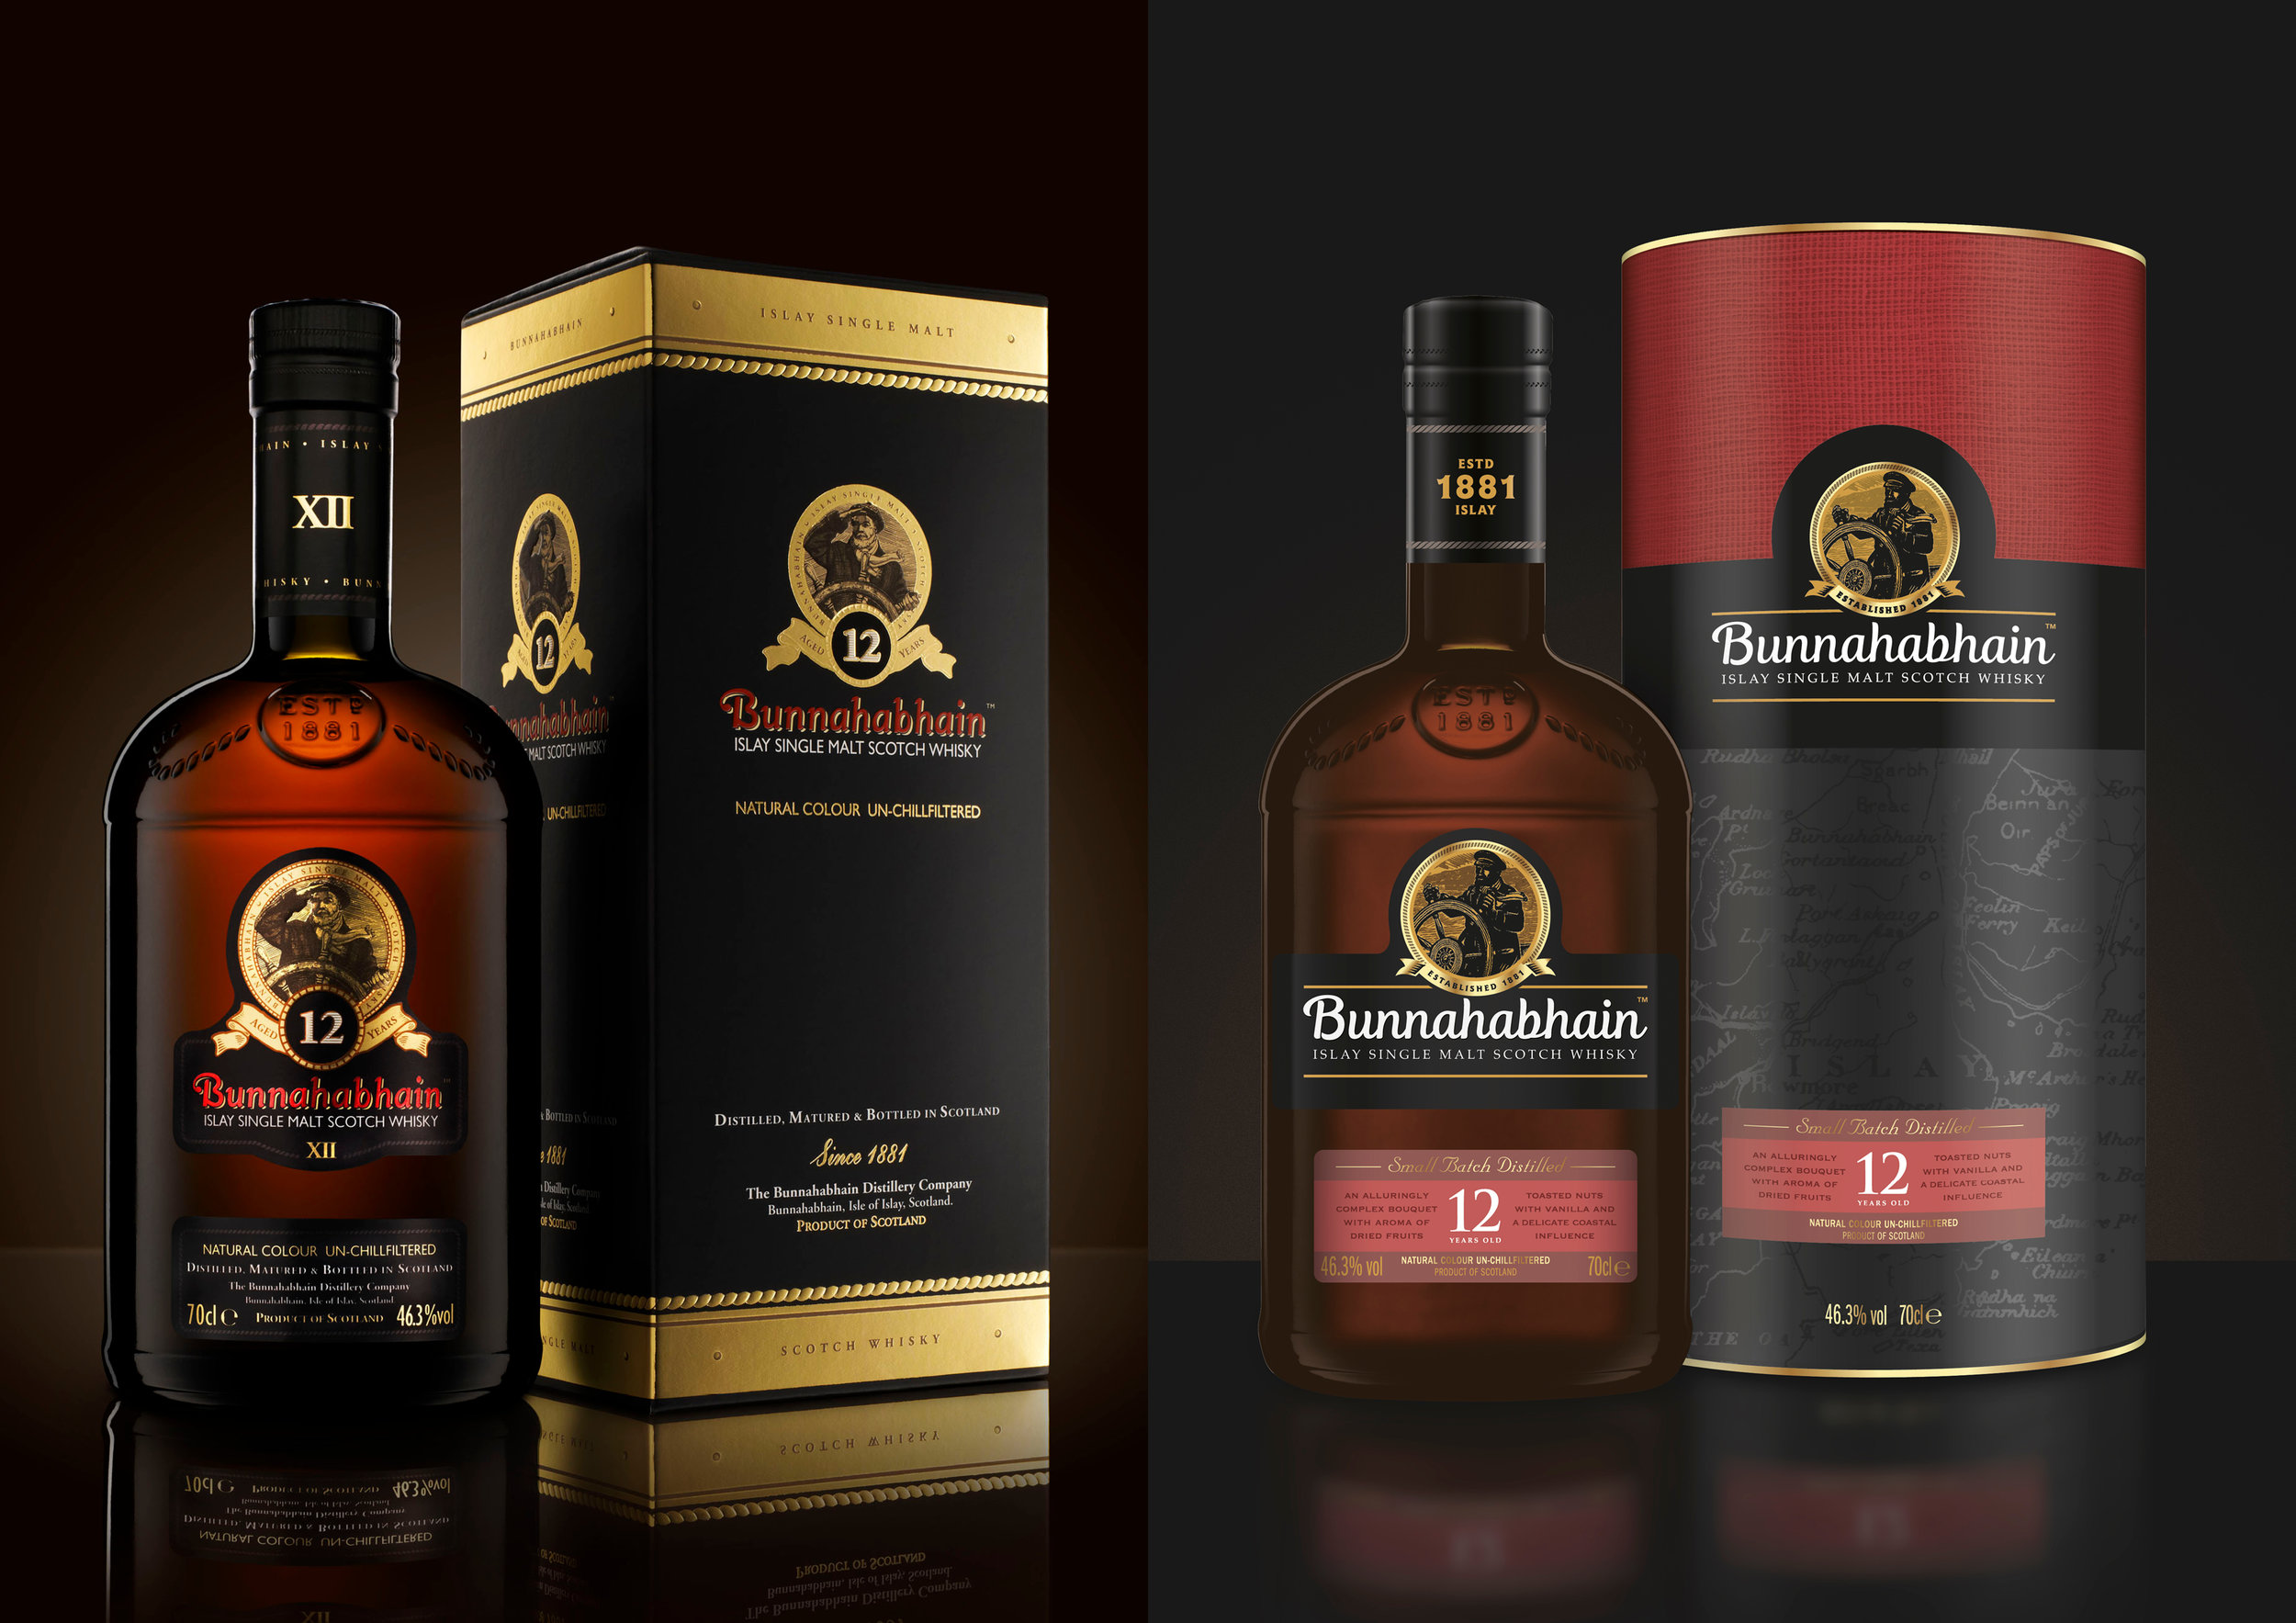 Brand Positioning and Packaging Redesign for Renowned Islay Single Malt Scotch Whisky